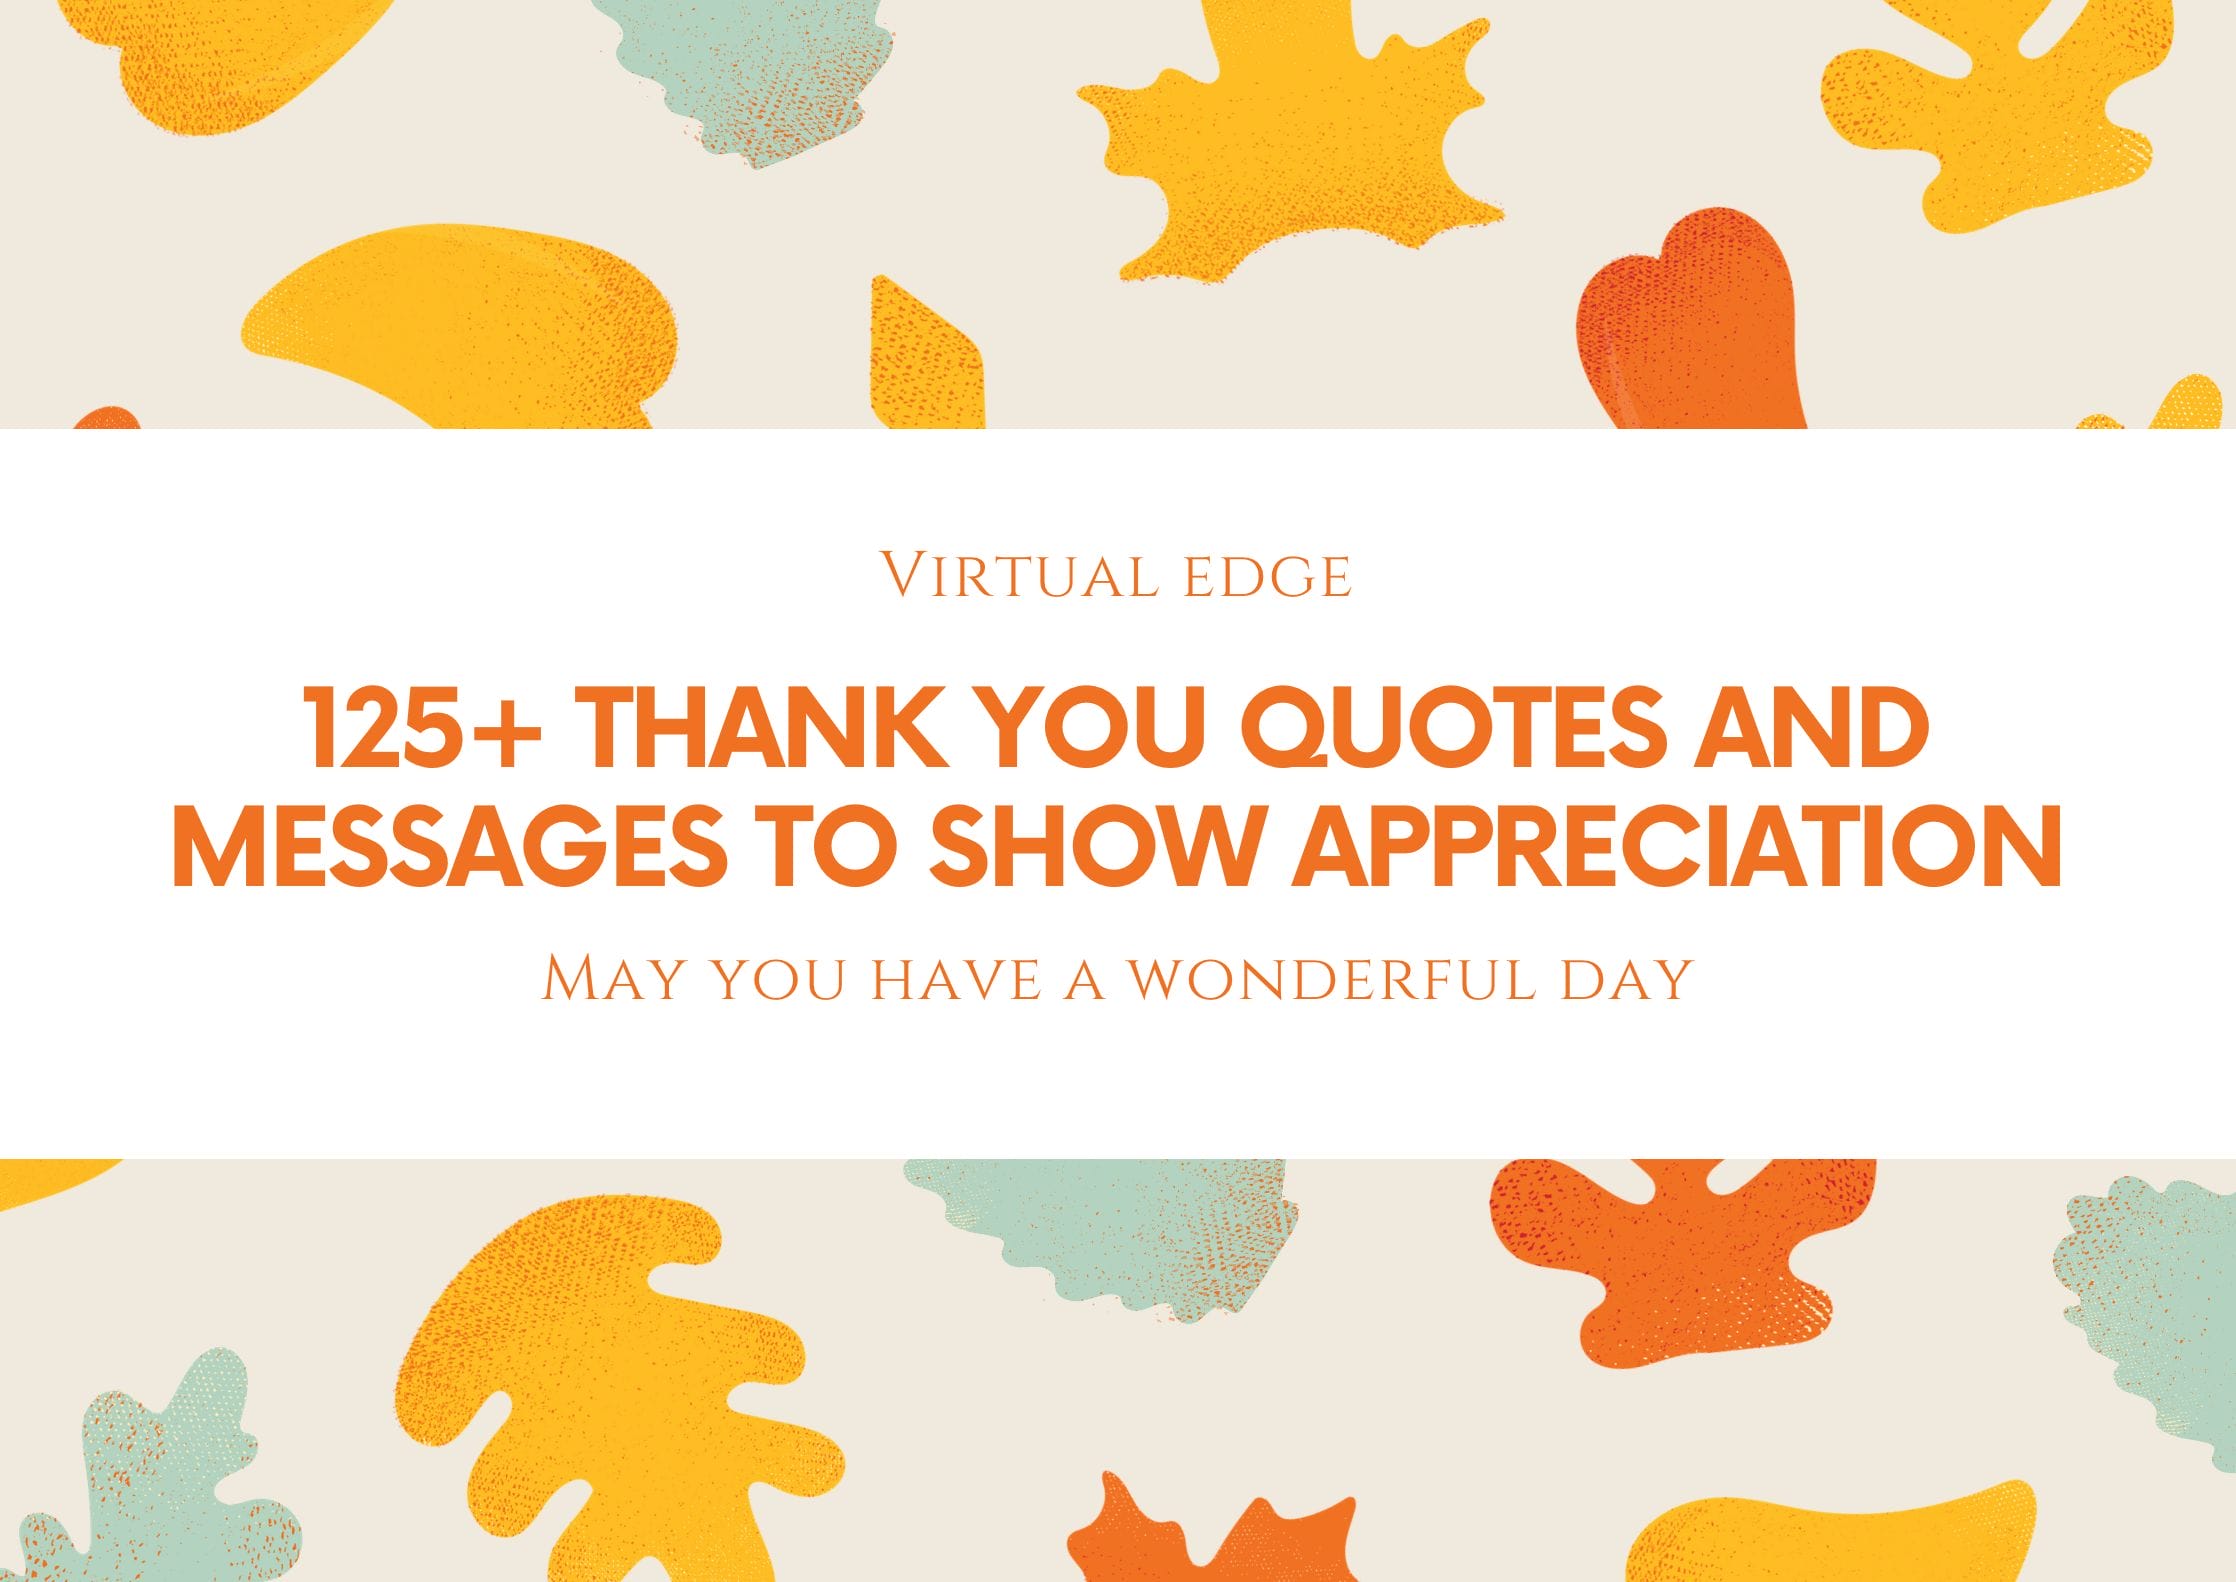 125+ Thank You Quotes and Messages to Show Appreciation